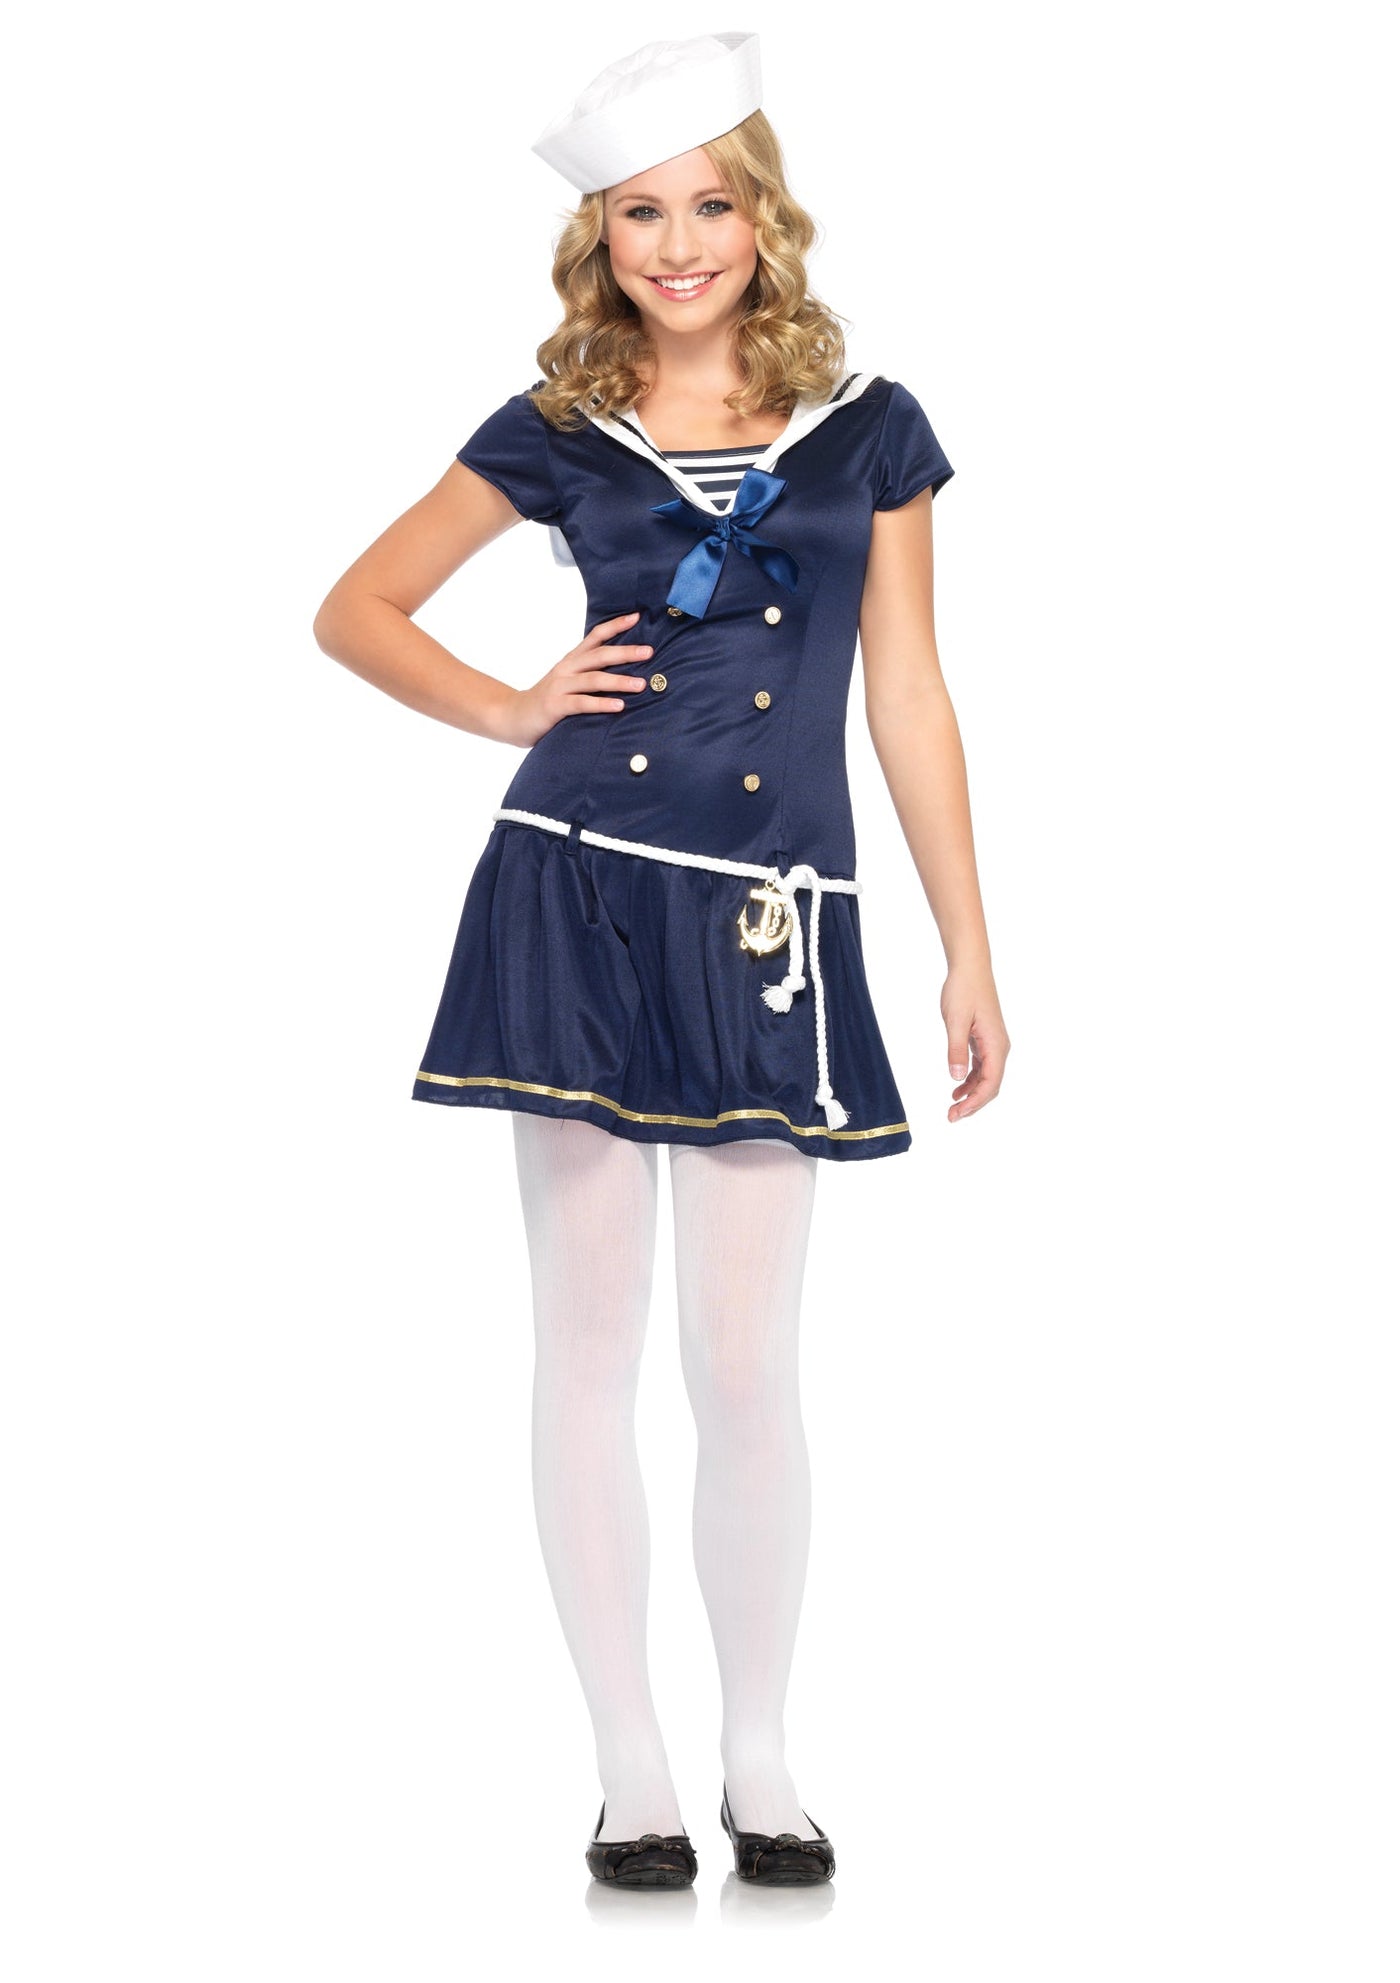 Girls Shipmate Cutie Costume - JJ's Party House